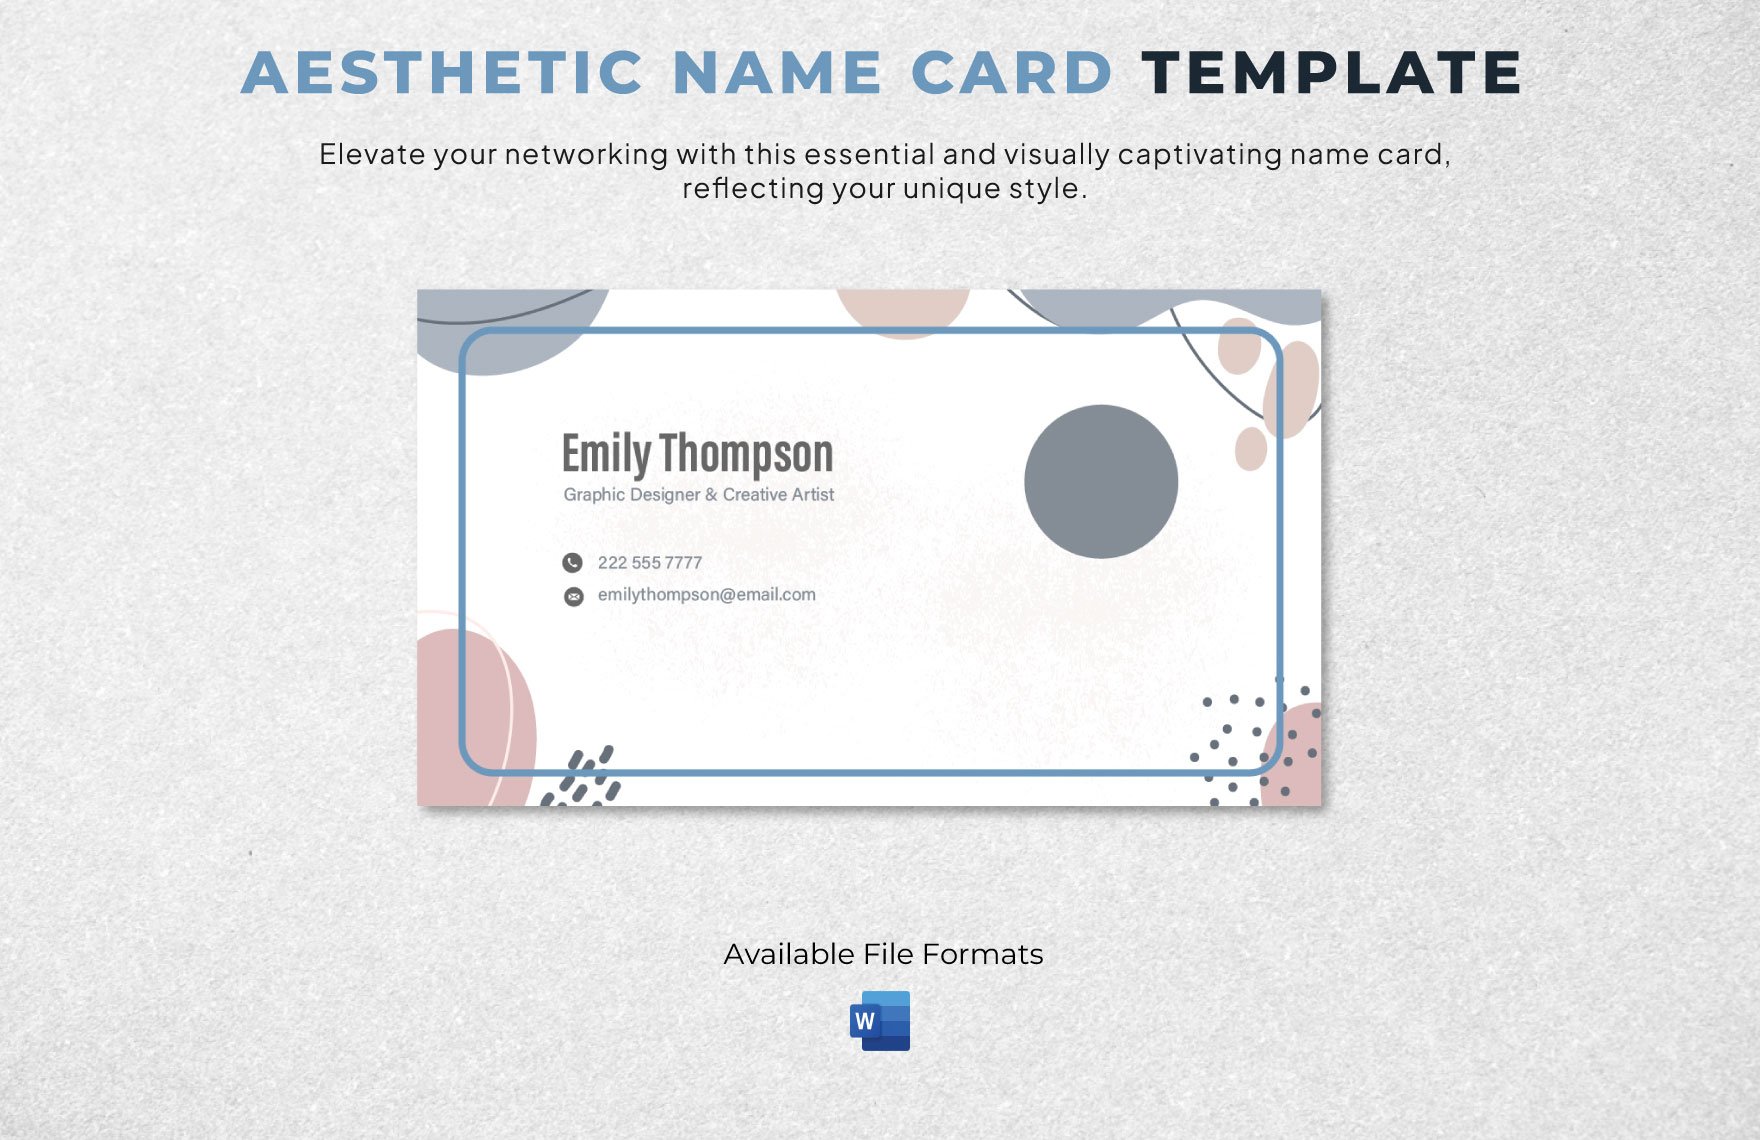 Free Aesthetic Name Card Template